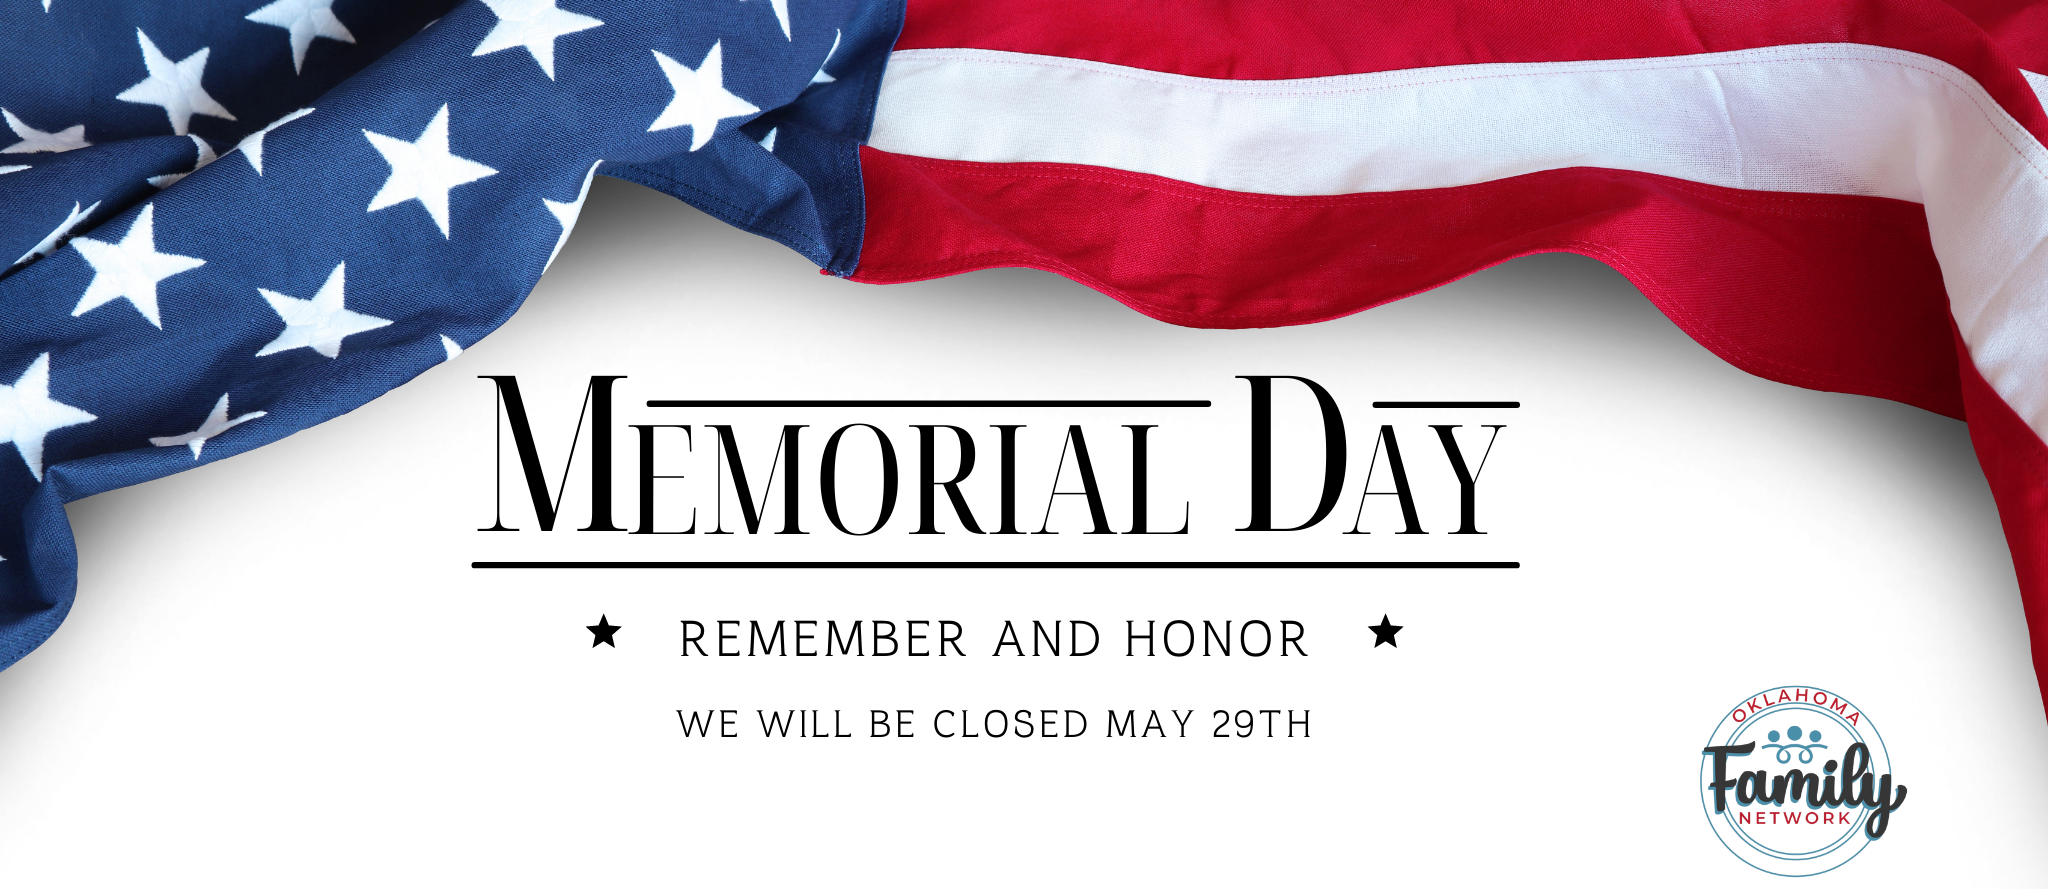 Memorial Day. We will be closed May 29th